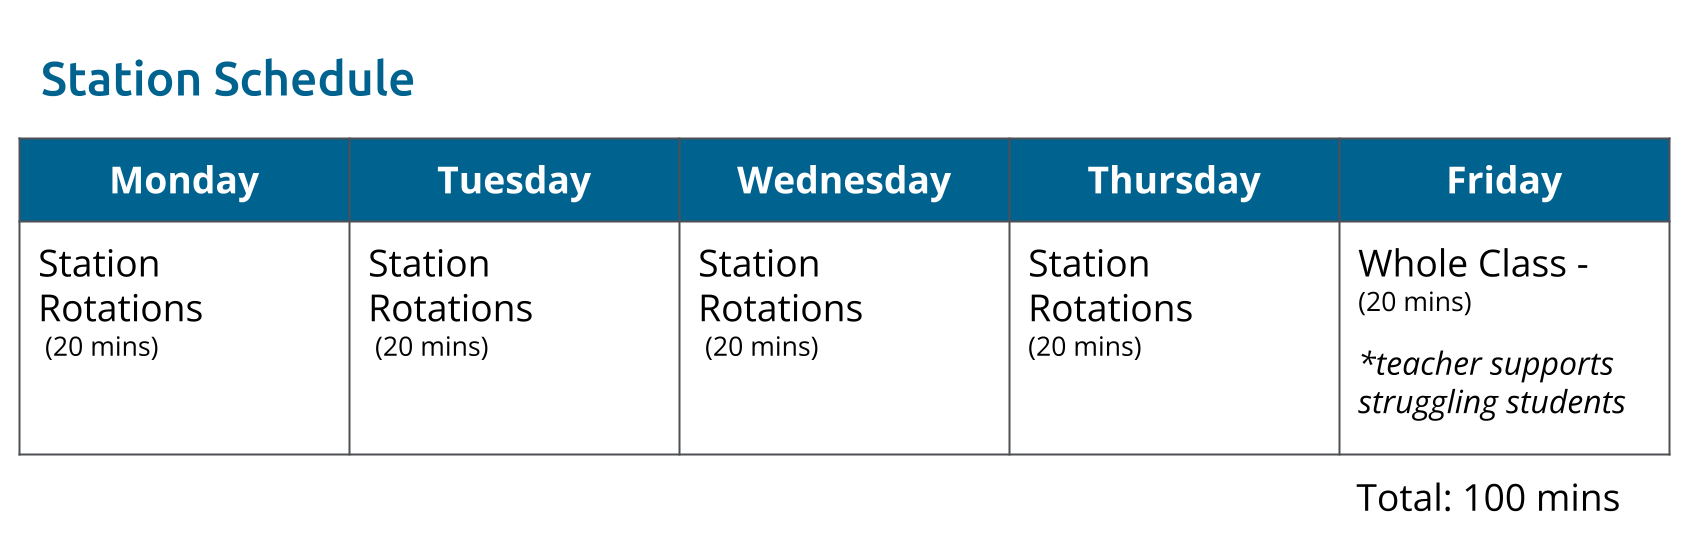 weekly_schedule_stations.png